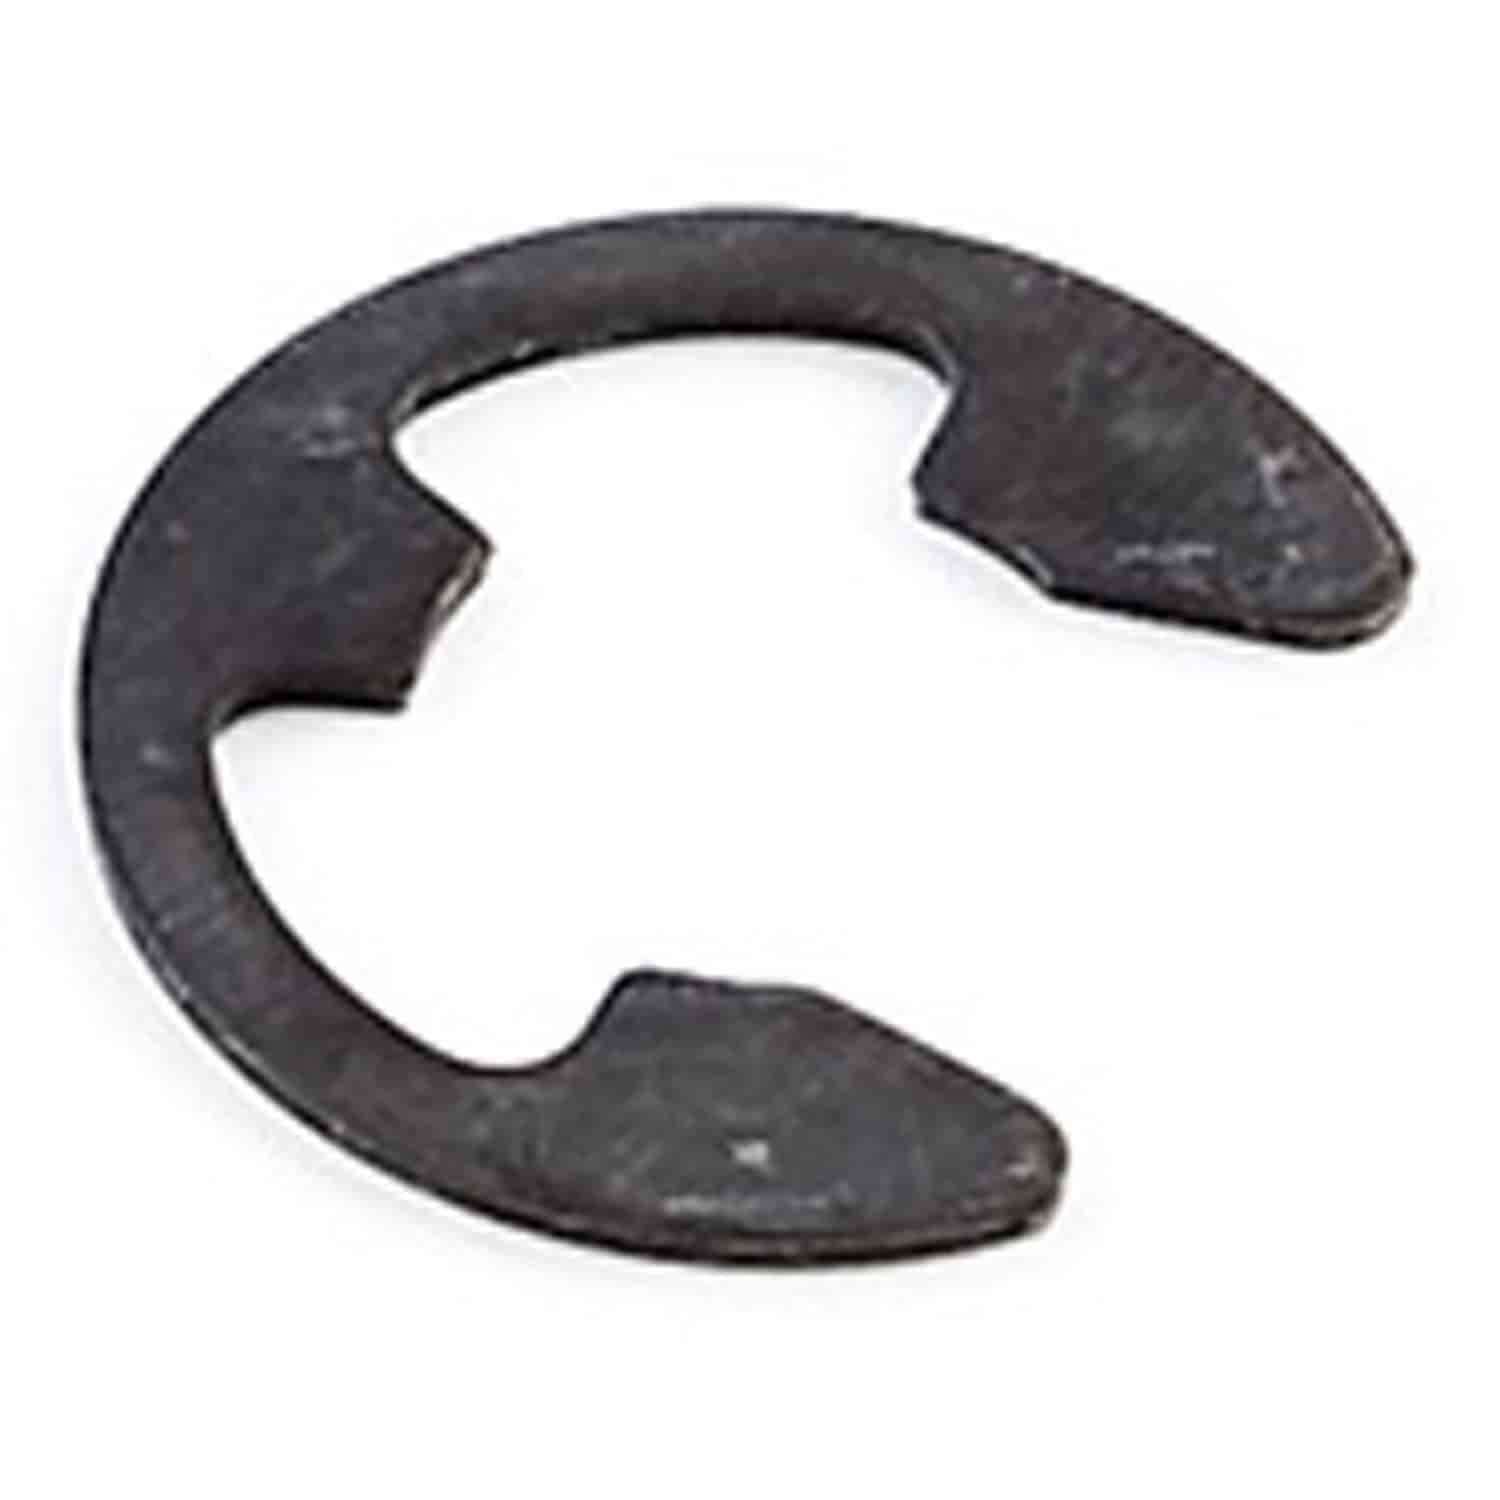 This center axle disconnect retaining clip from Omix-ADA fits 87-95 Jeep Wrangler YJ .